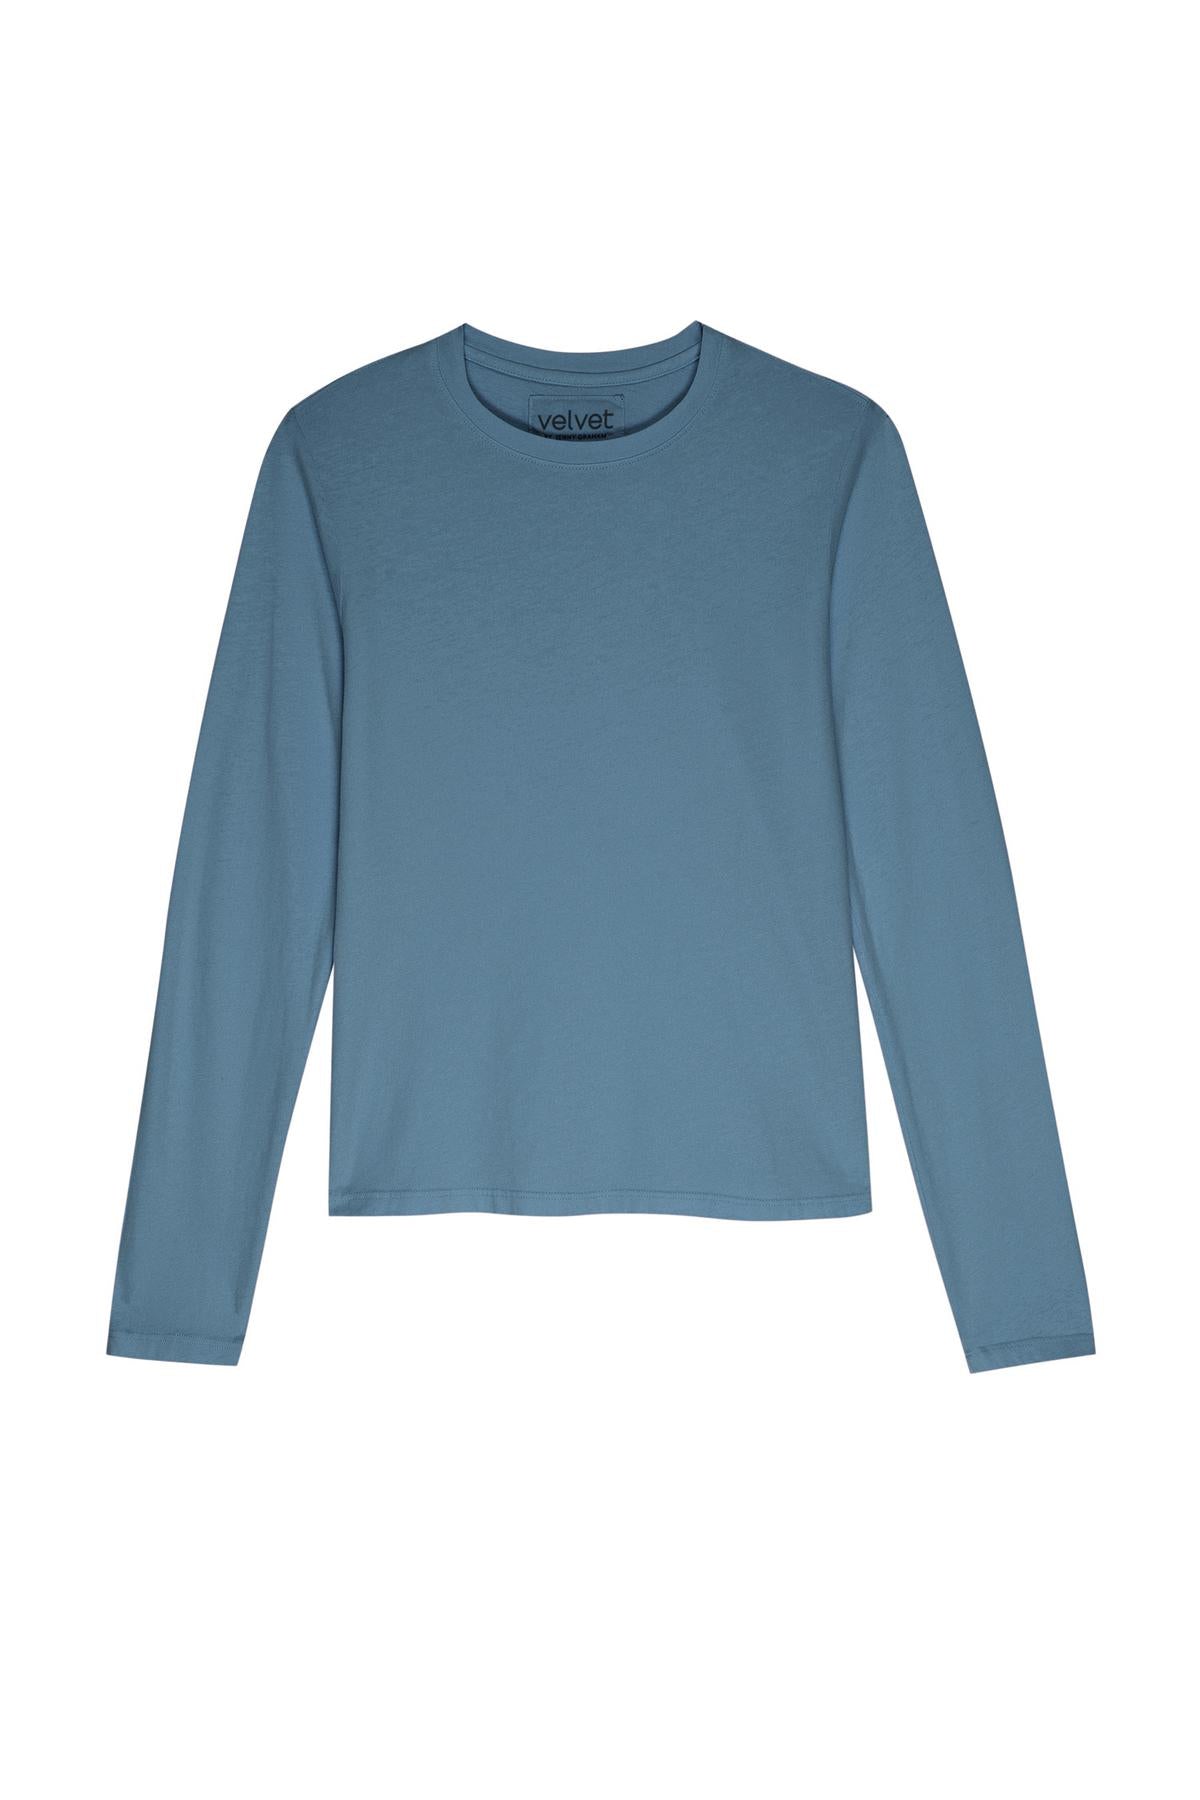 Organic cotton blue long-sleeved VICENTE TEE with a relaxed fit by Velvet by Jenny Graham.-35721180217537